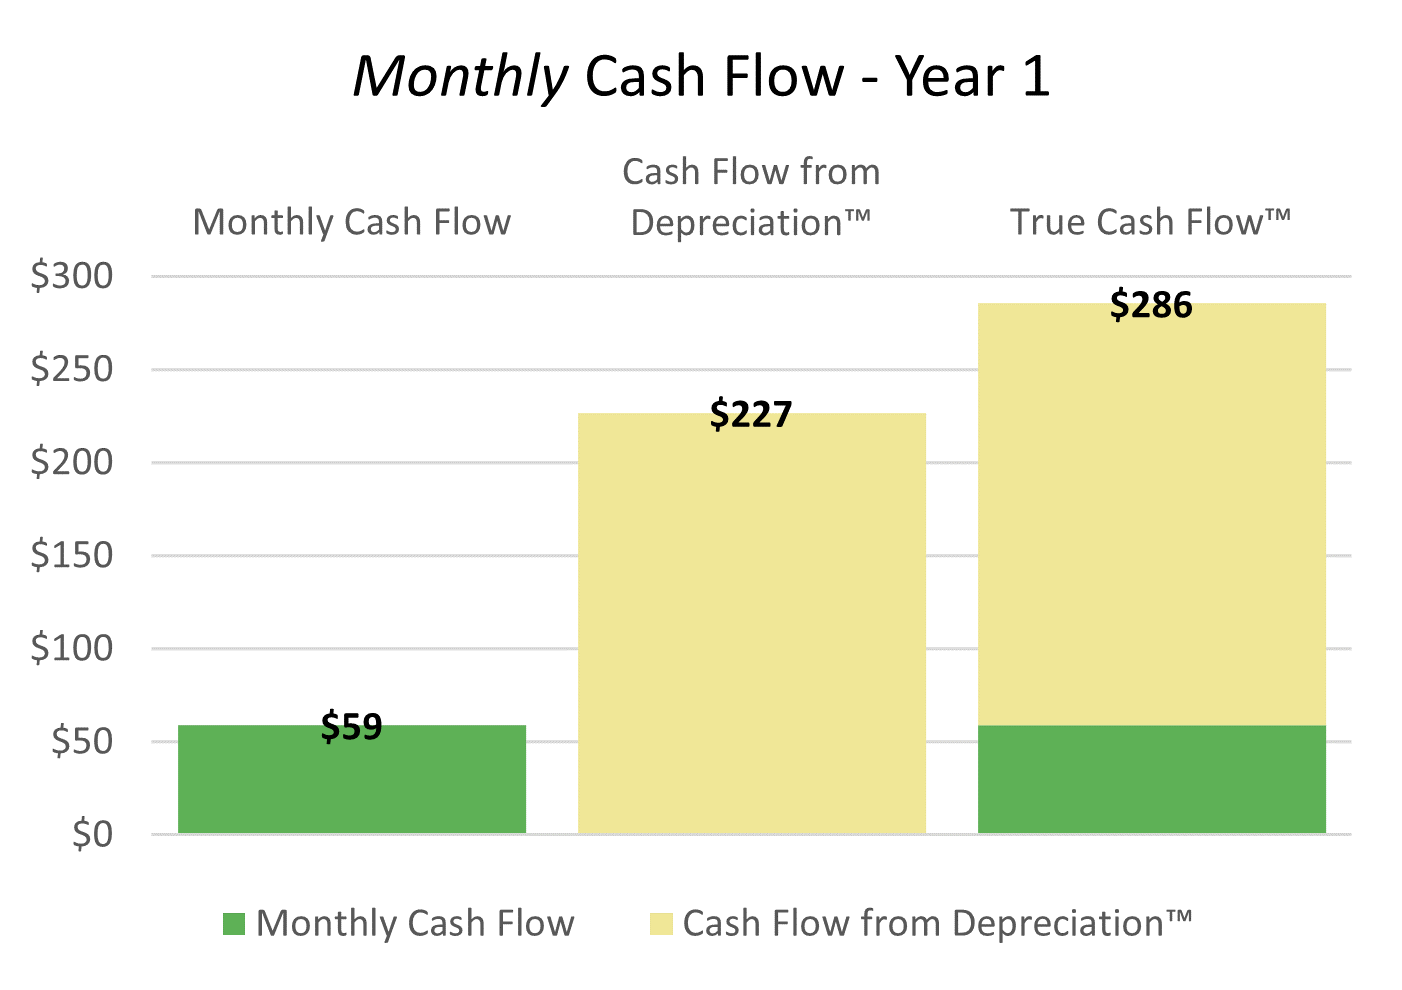 1 - Monthly Cash Flow - Year 1